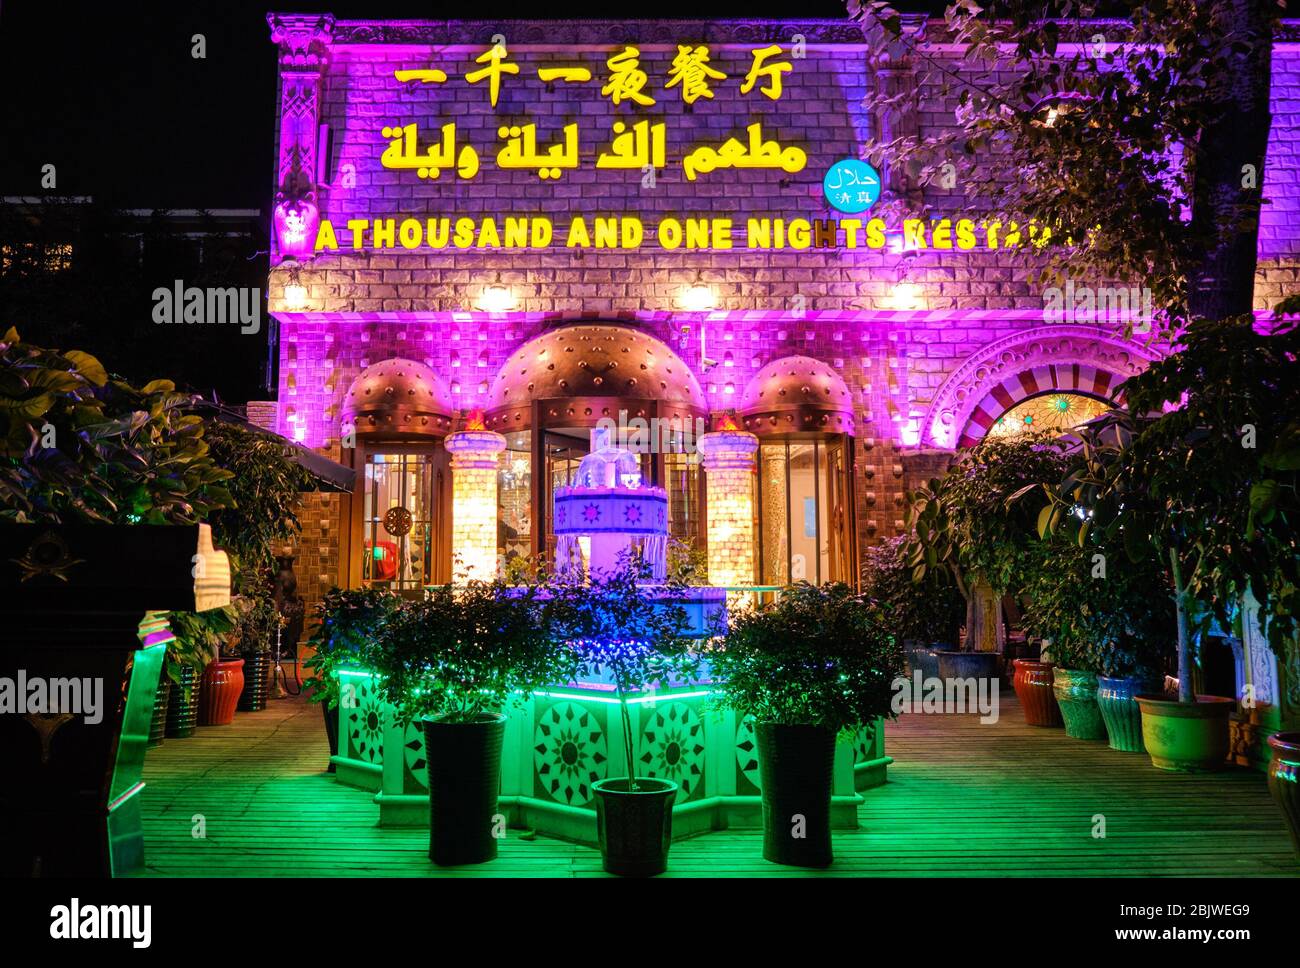 Beijing/ China - October 11, 2018: A Thousand and One Nights, popular Middle Eastern restaurant in Sanlitun, Chaoyang district, Beijing Stock Photo